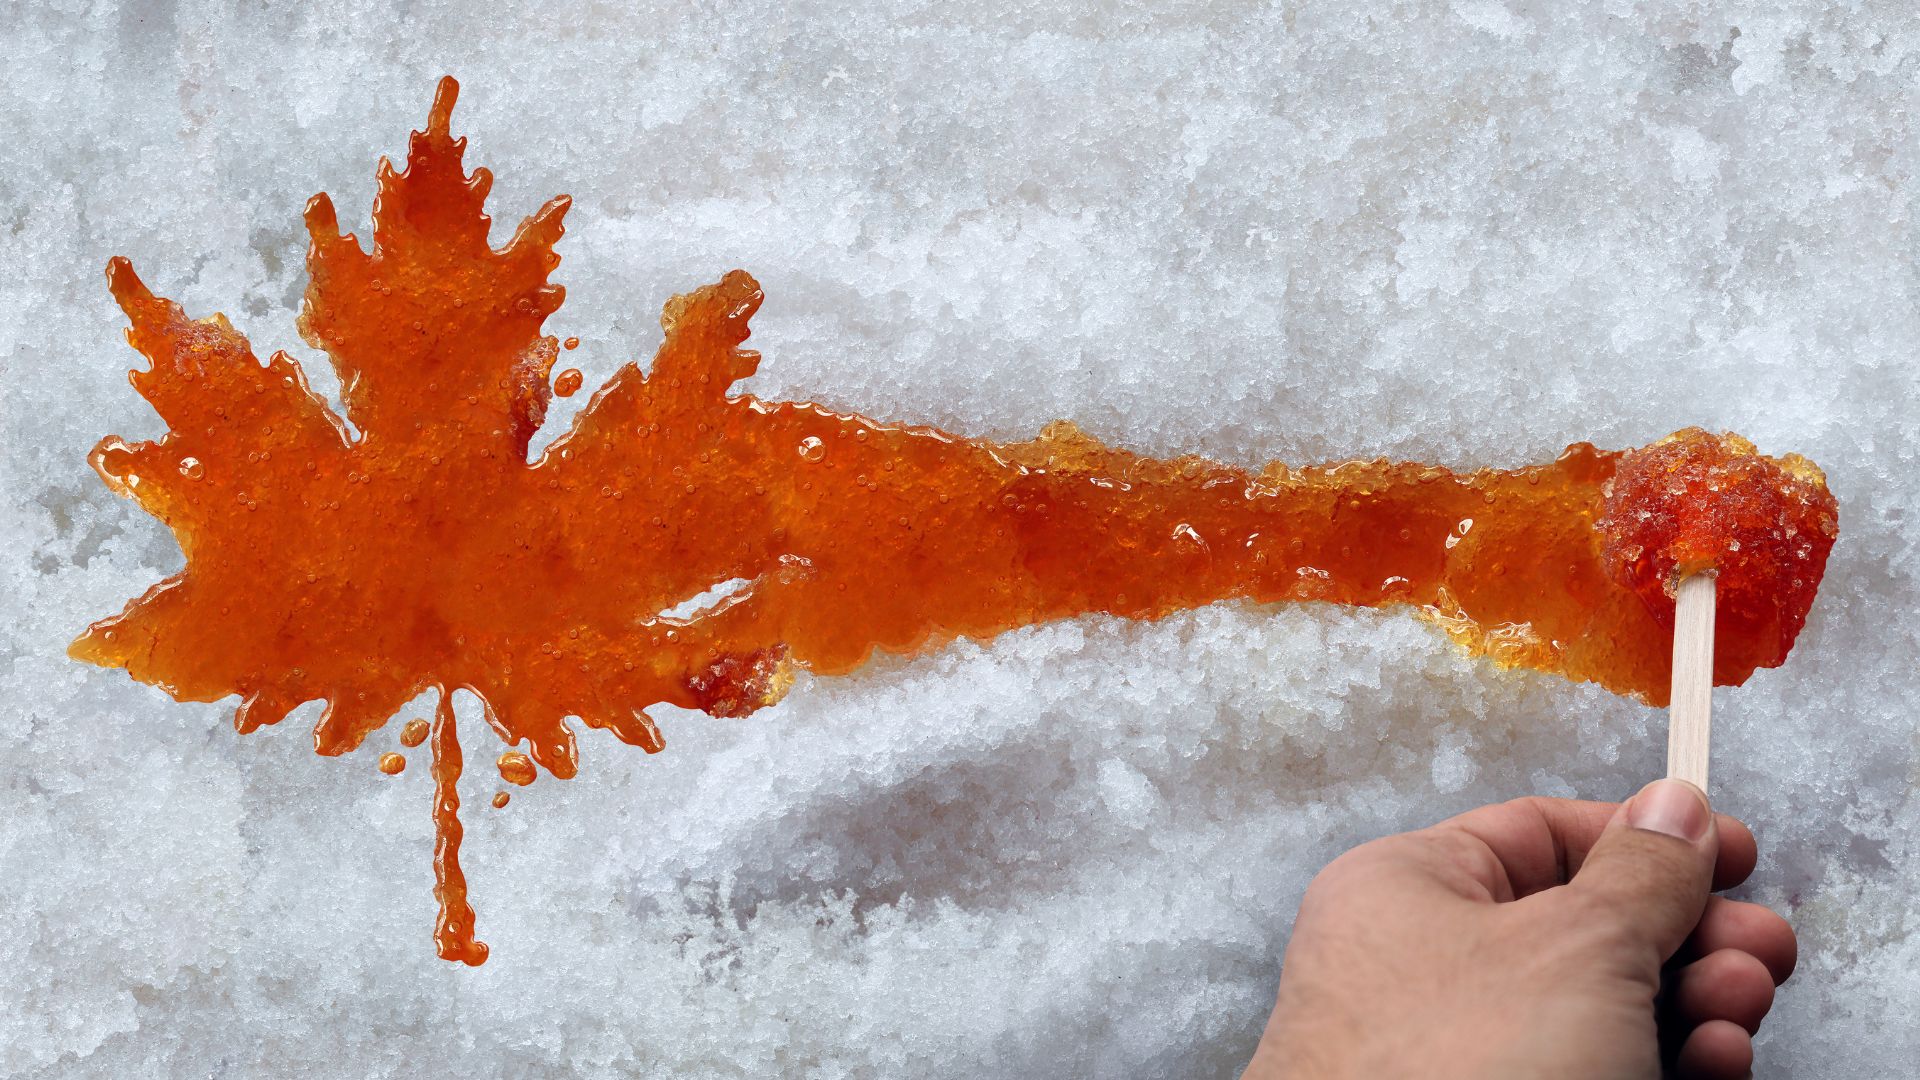 Maple candy being rolled on a stick over snow